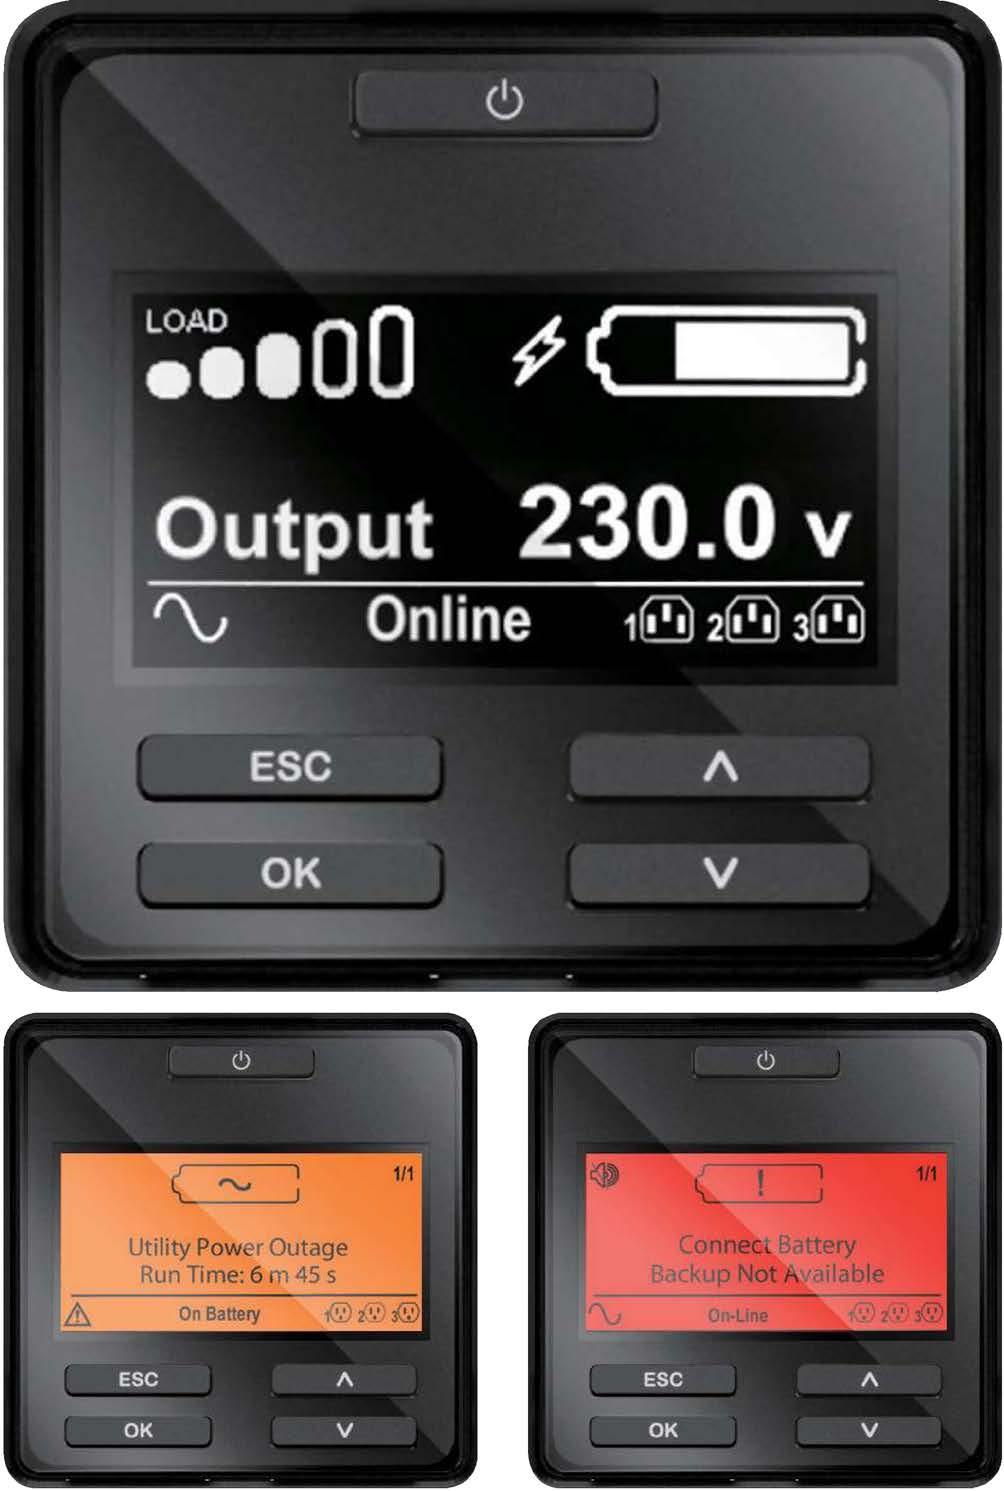 Smart-UPS On-Line display Intuitive, easy-to-use LCD provides clear and accurate information in multiple languages.